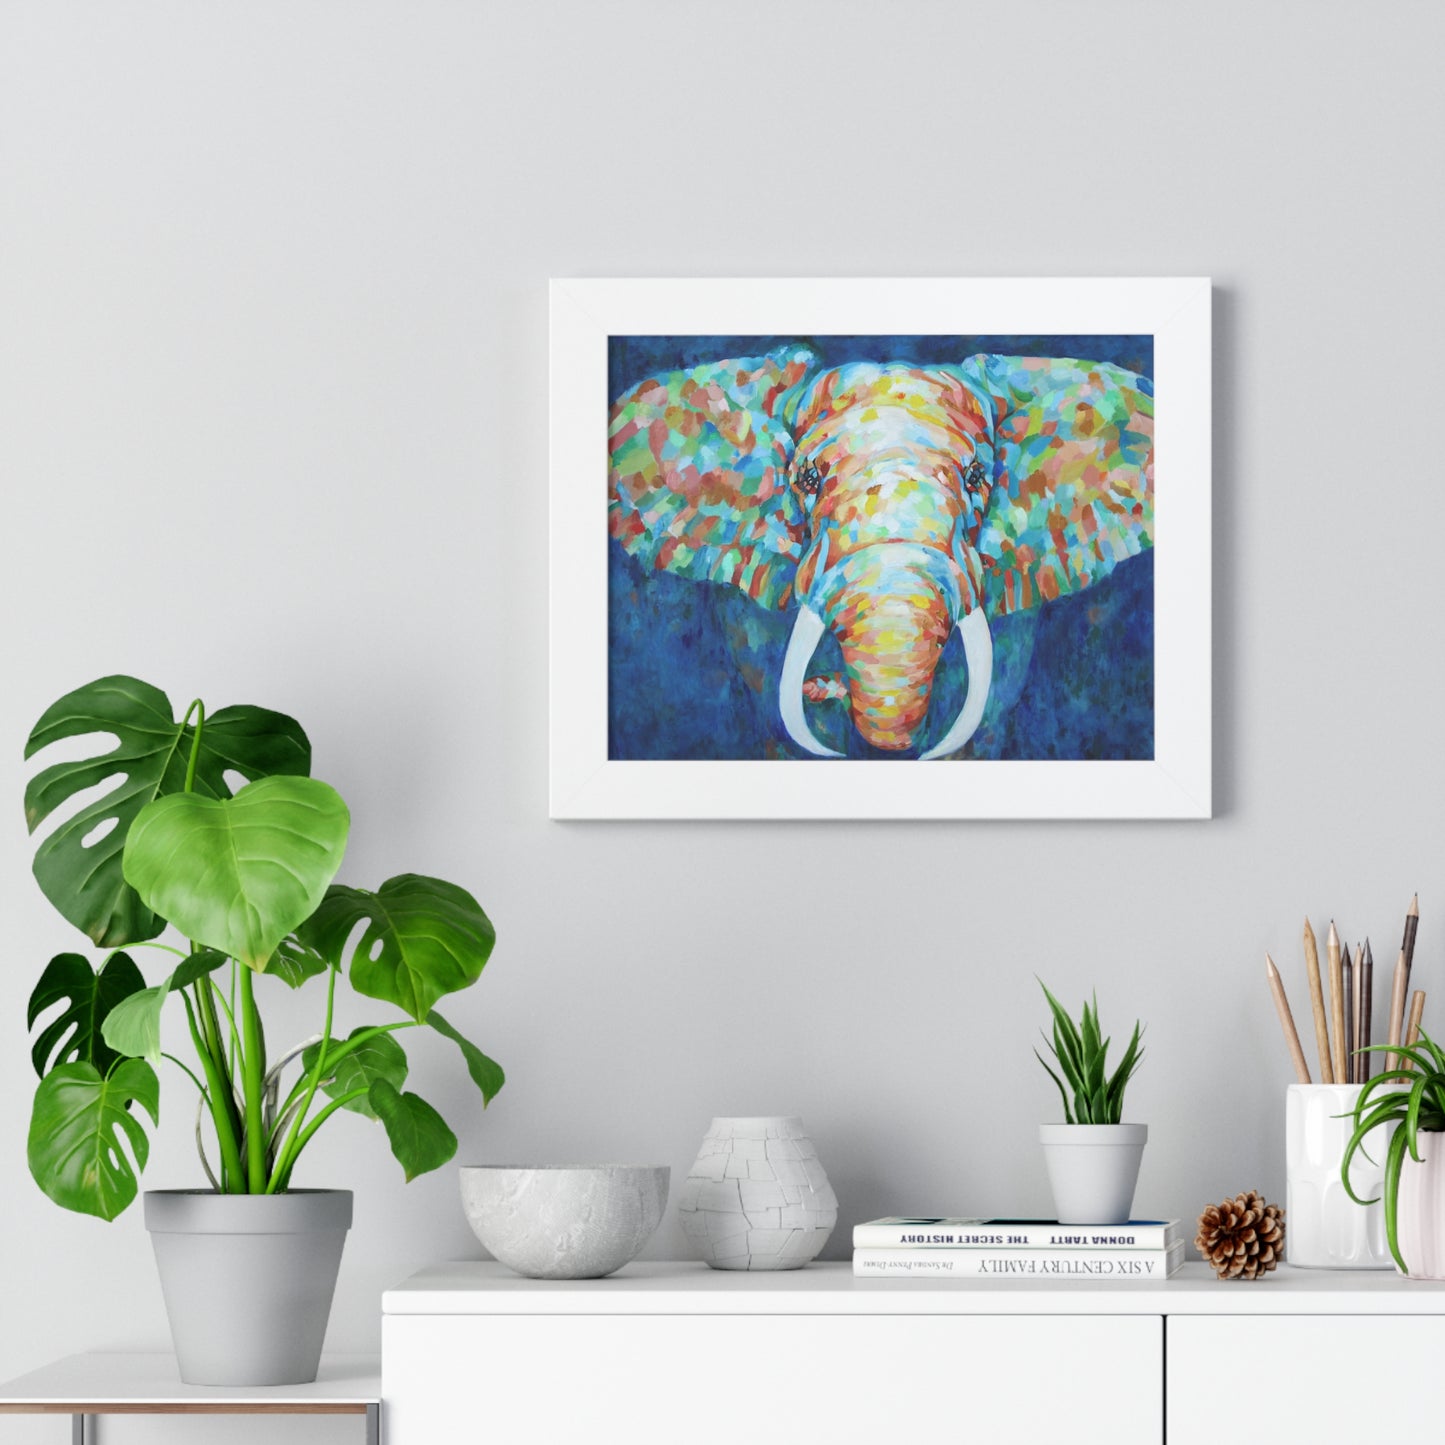 Colorful Elephant - Framed Horizontal Poster white frame in  situ